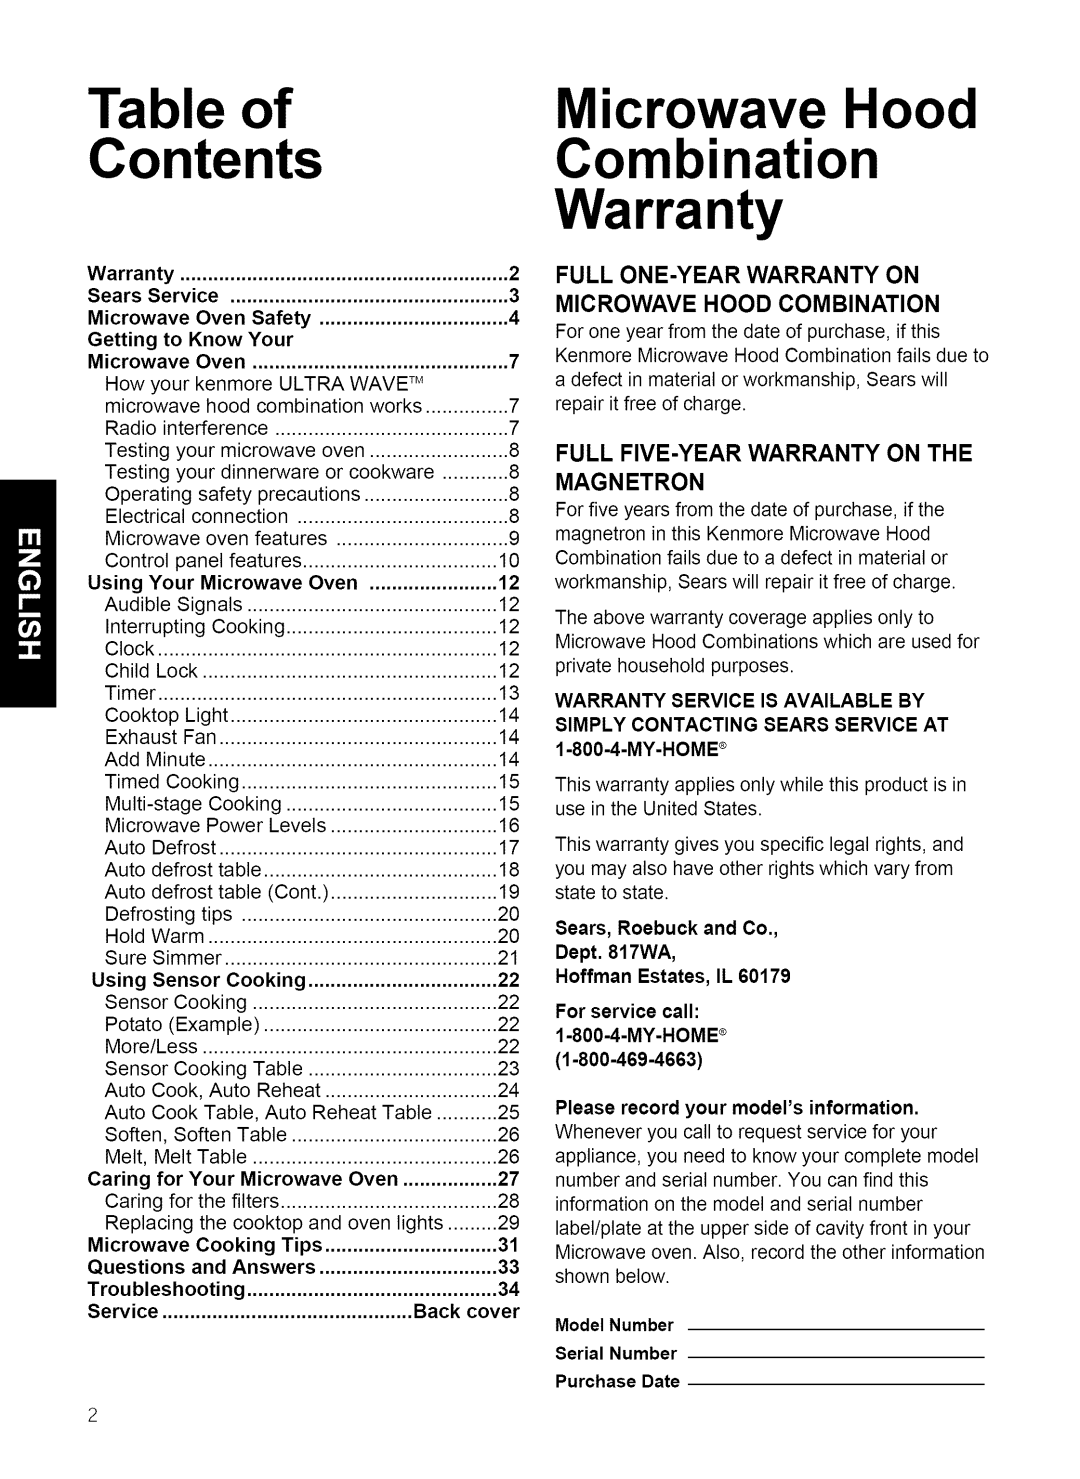 Kenmore 721.80862 manual Microwave Hood, Combination, Warranty, Table of, Contents, Full Five-Yearwarranty On The Magnetron 